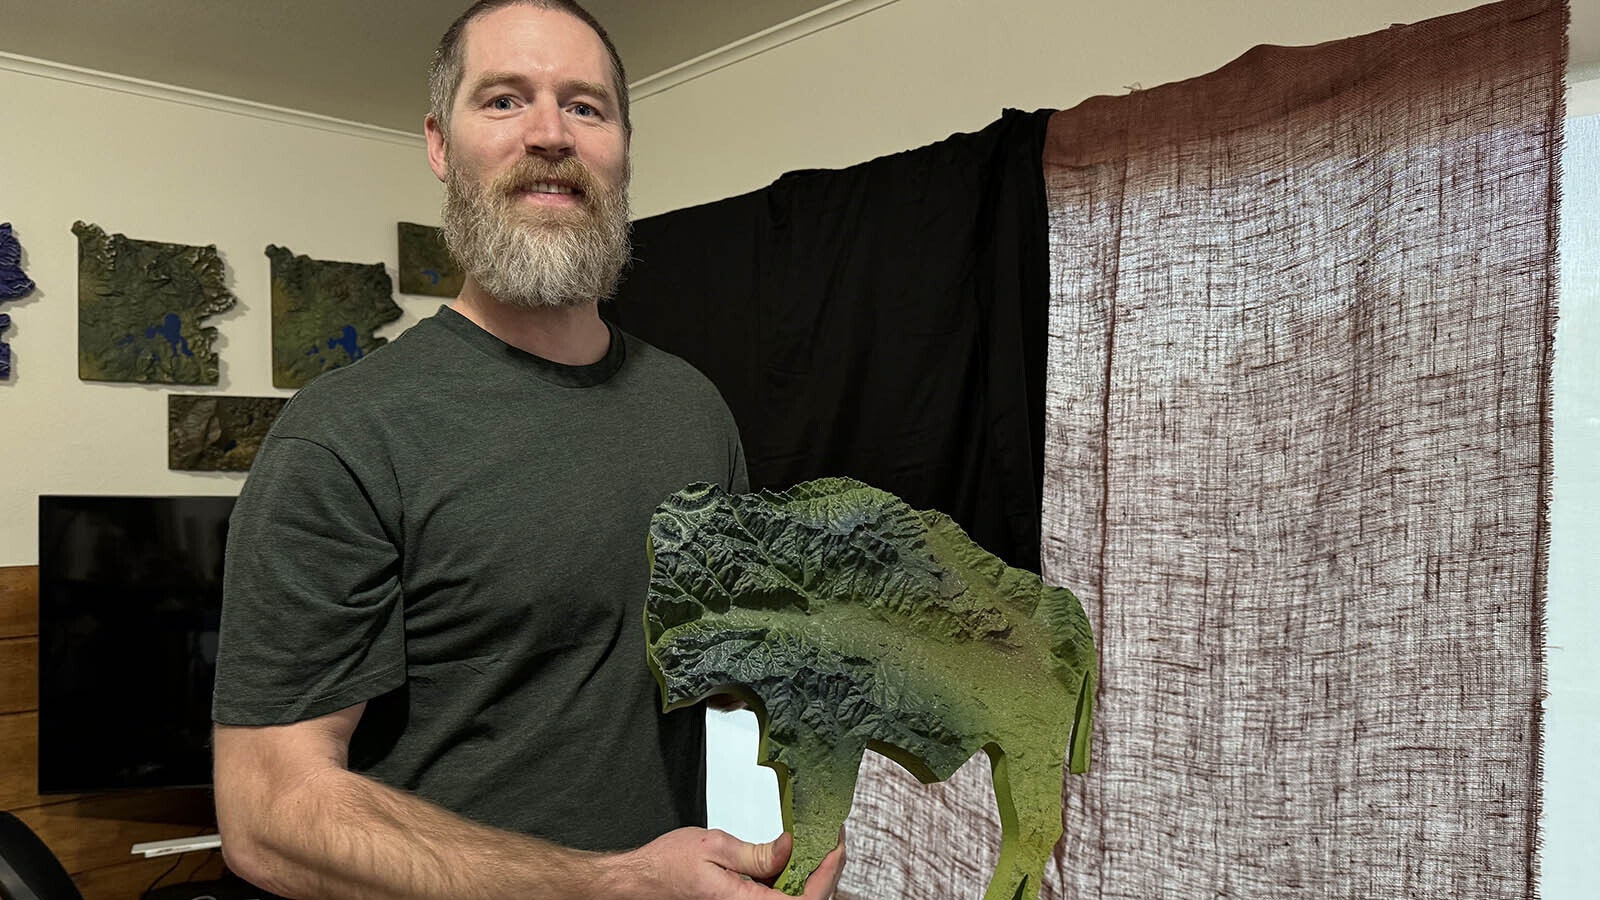 Nicholas Resch with a 3D-printed map of the South Fork of the Shoshone River, printed in the shape of the Wyoming bison. Maps like these are his best-selling 3D printing projects.